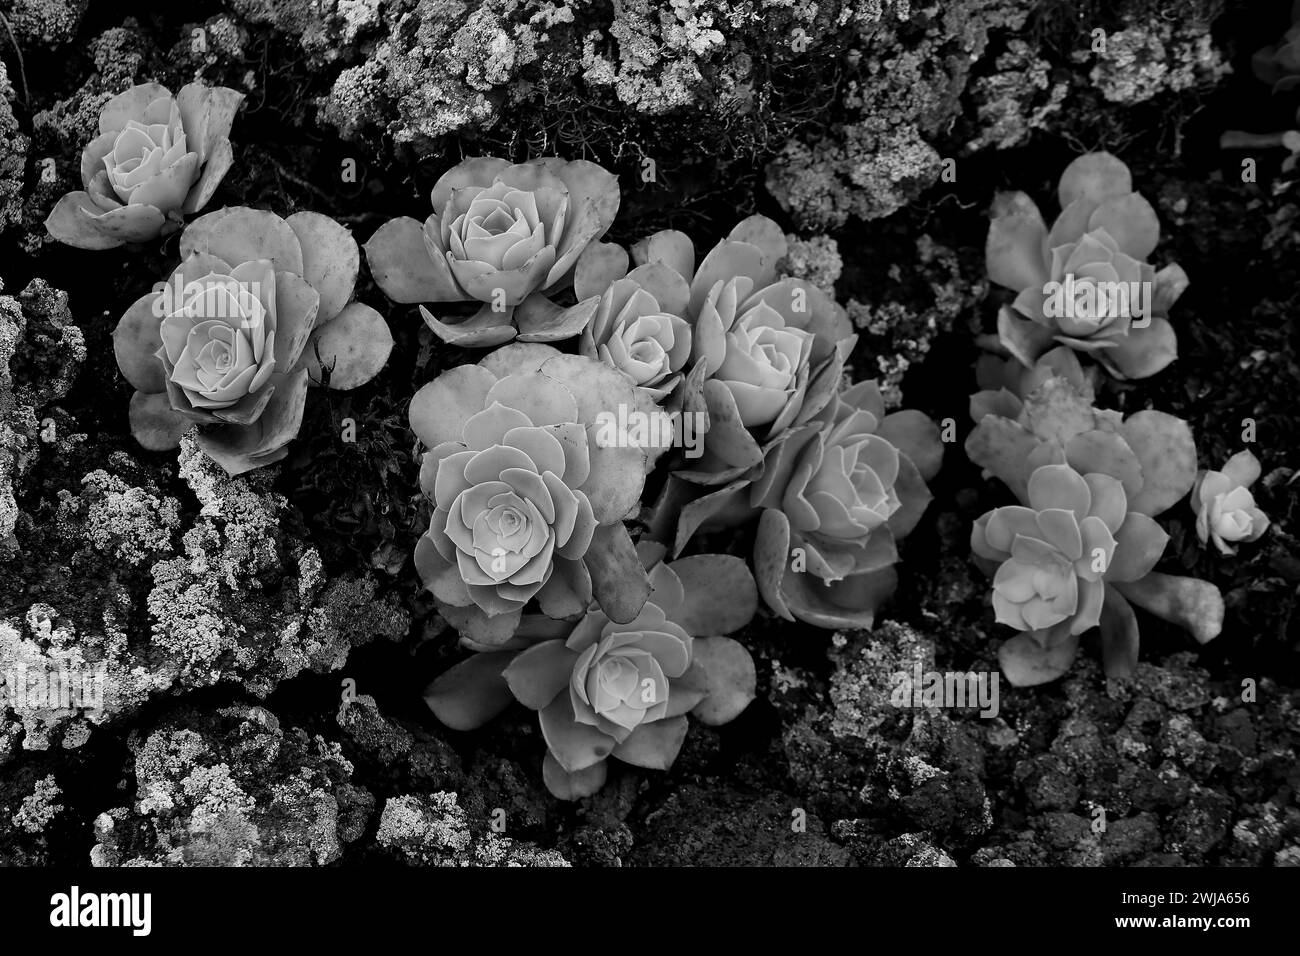 Black and white image of succulent plants with a rosette pattern, nestled among rocky textures Stock Photo